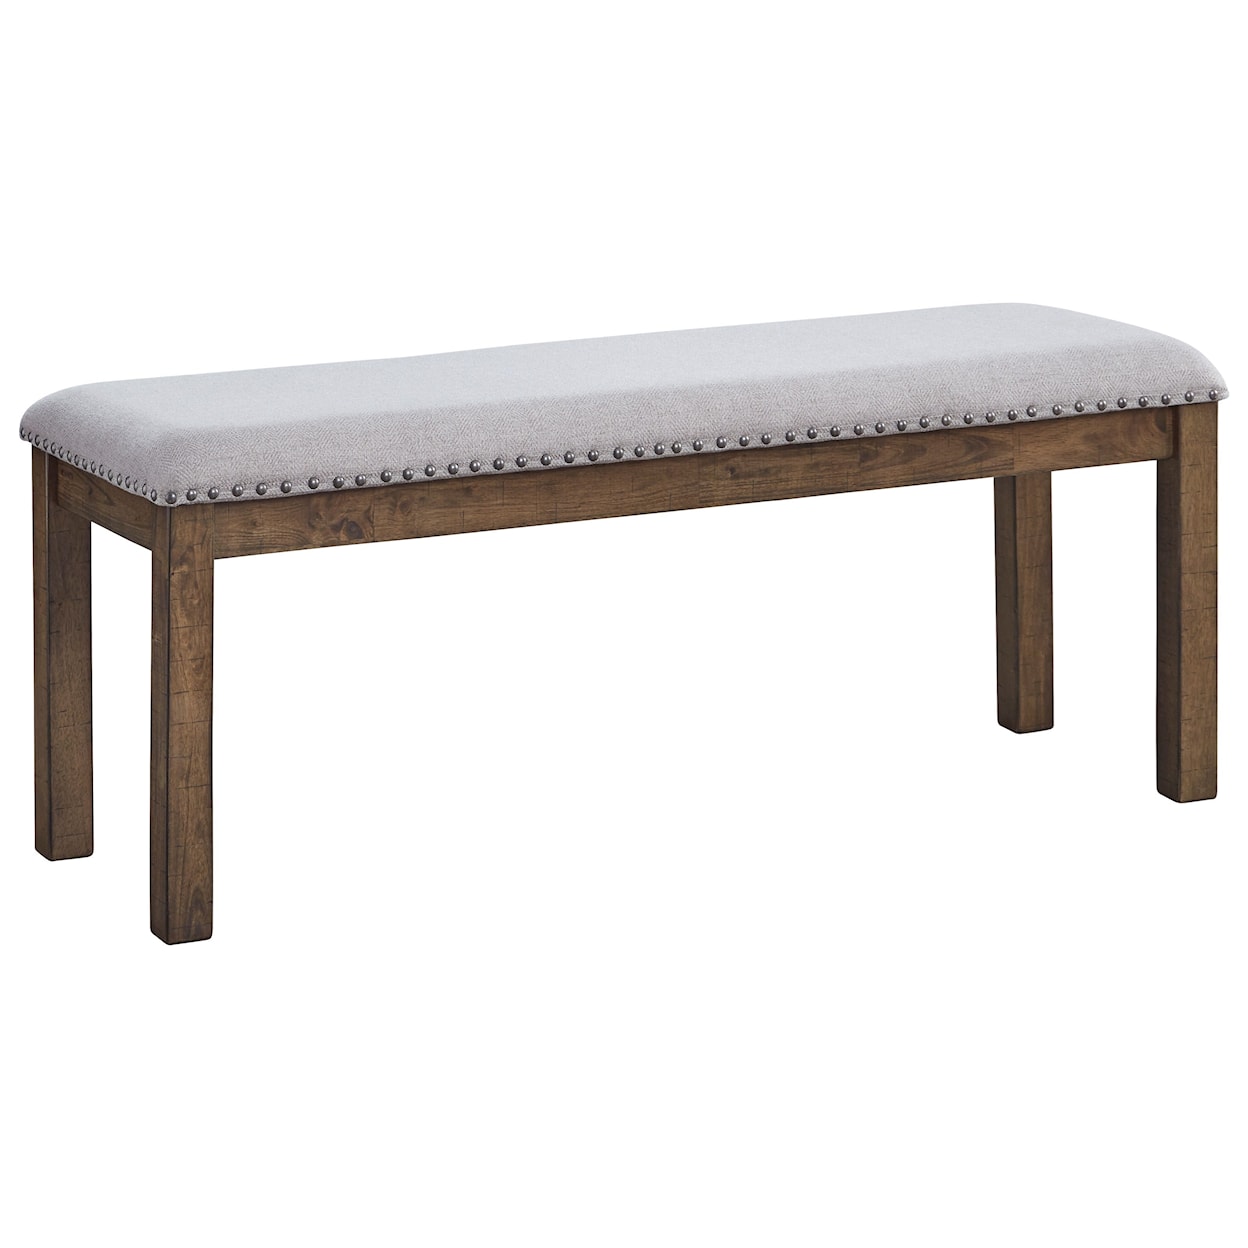 Signature Design by Ashley Furniture Moriville Upholstered Bench